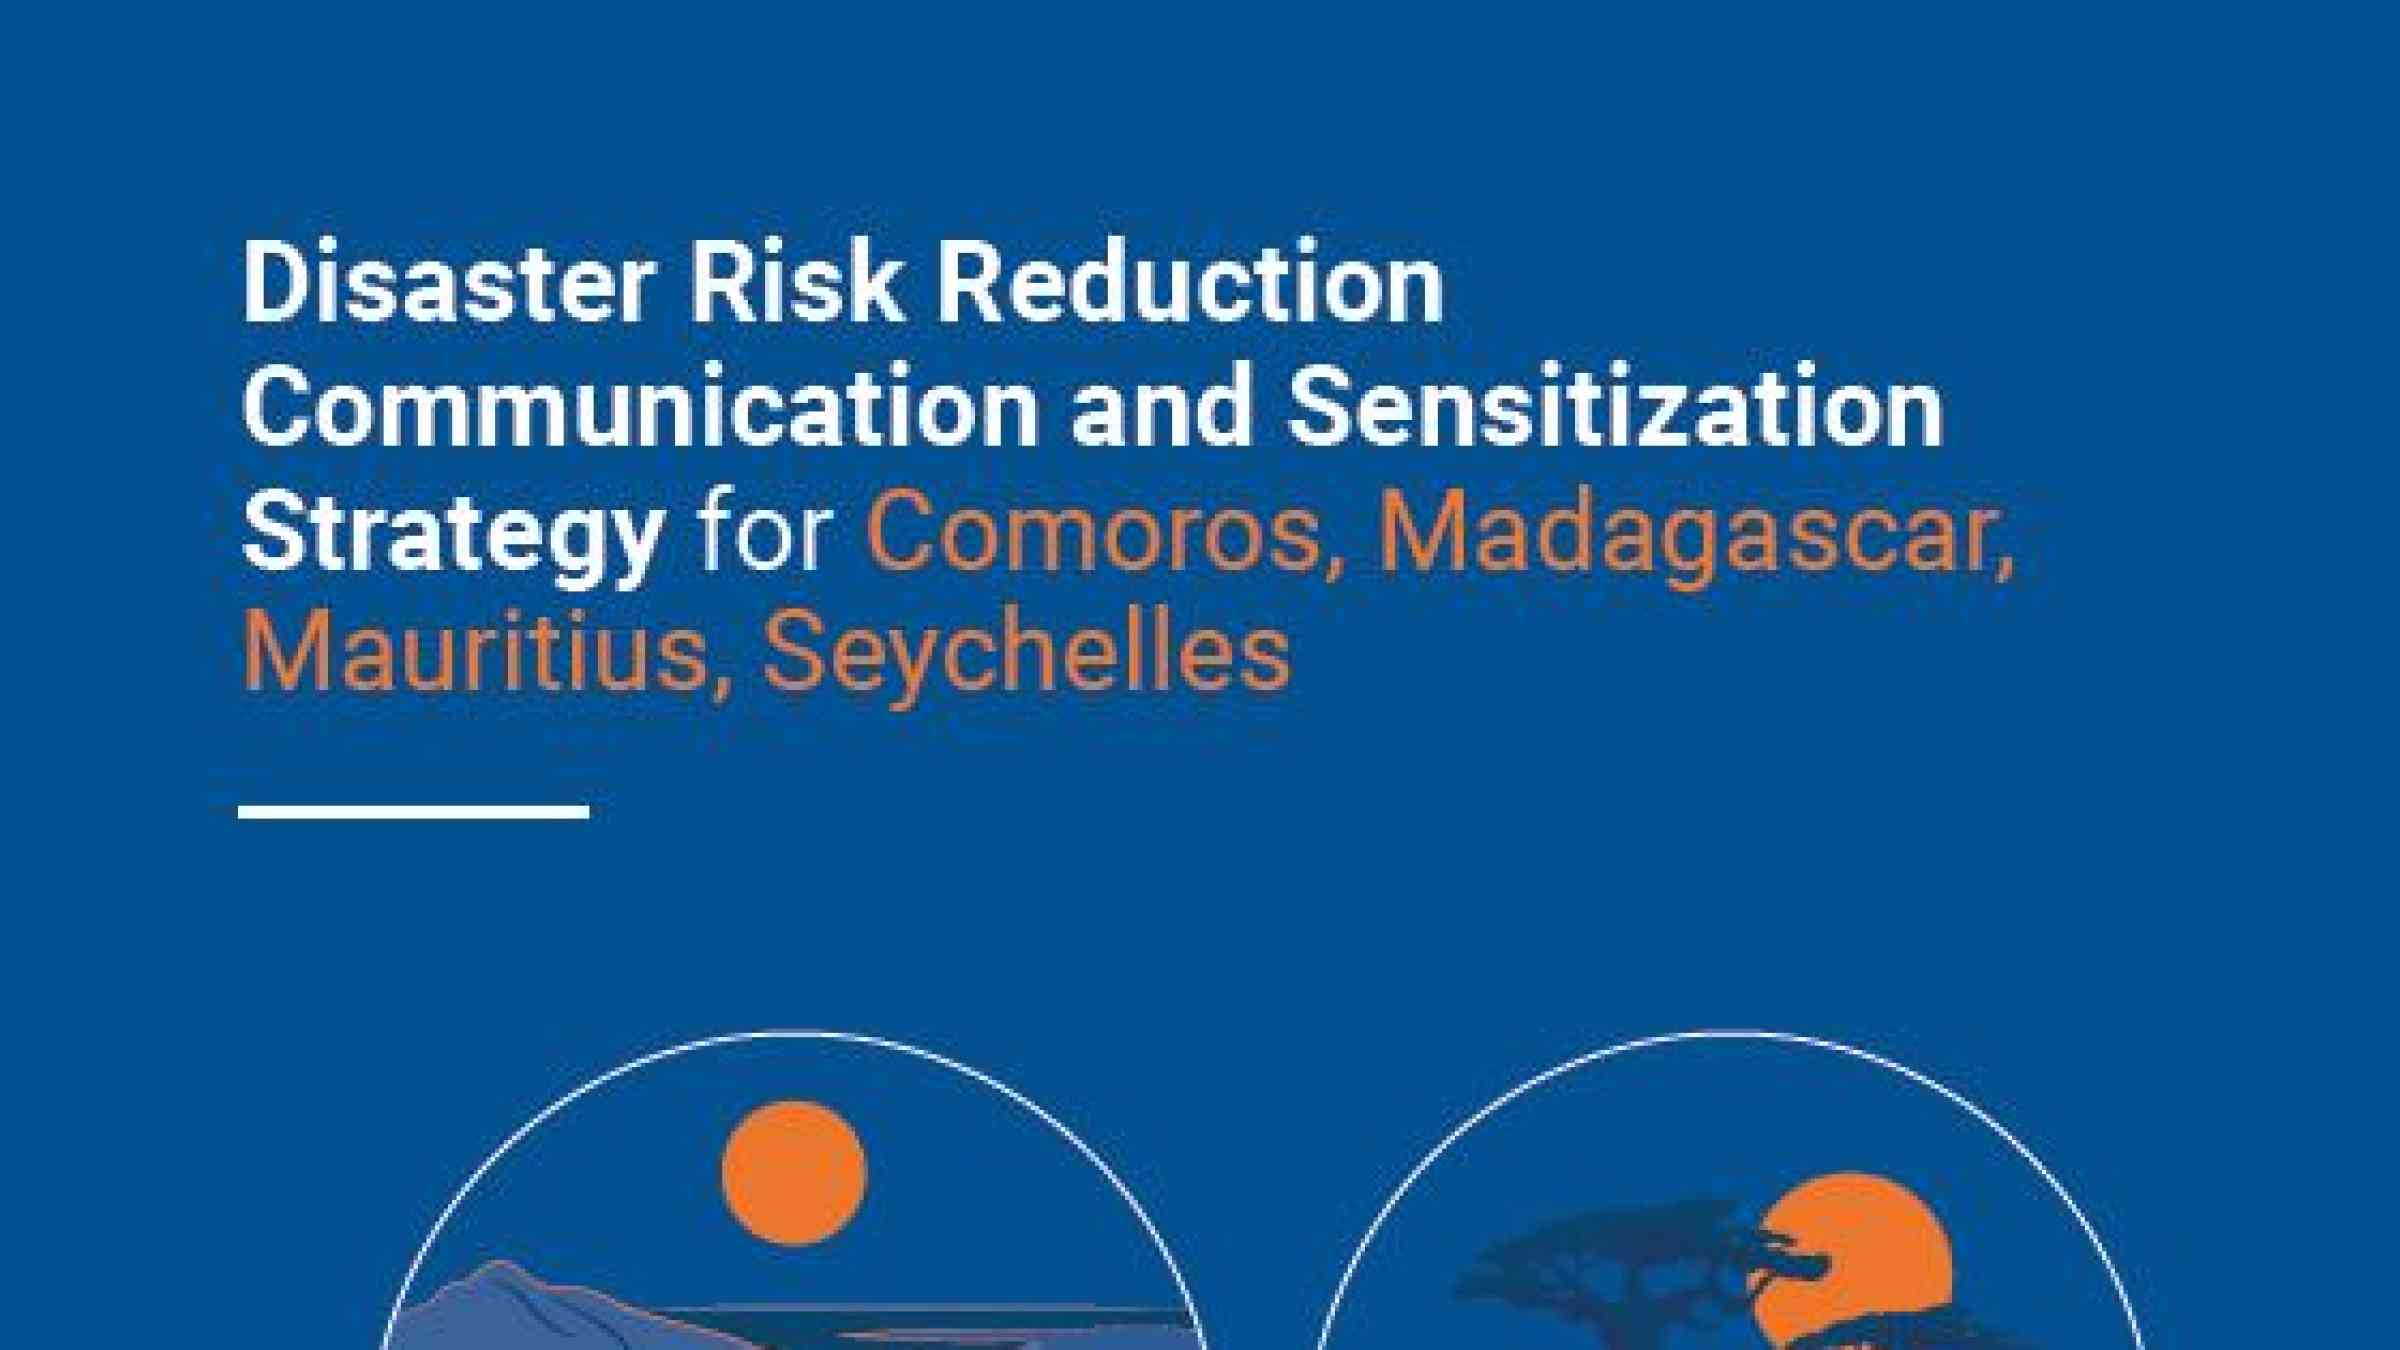 Disaster Risk Reduction Communication and Sensitization Strategy for Comoros, Madagascar, Mauritius, Seychelles